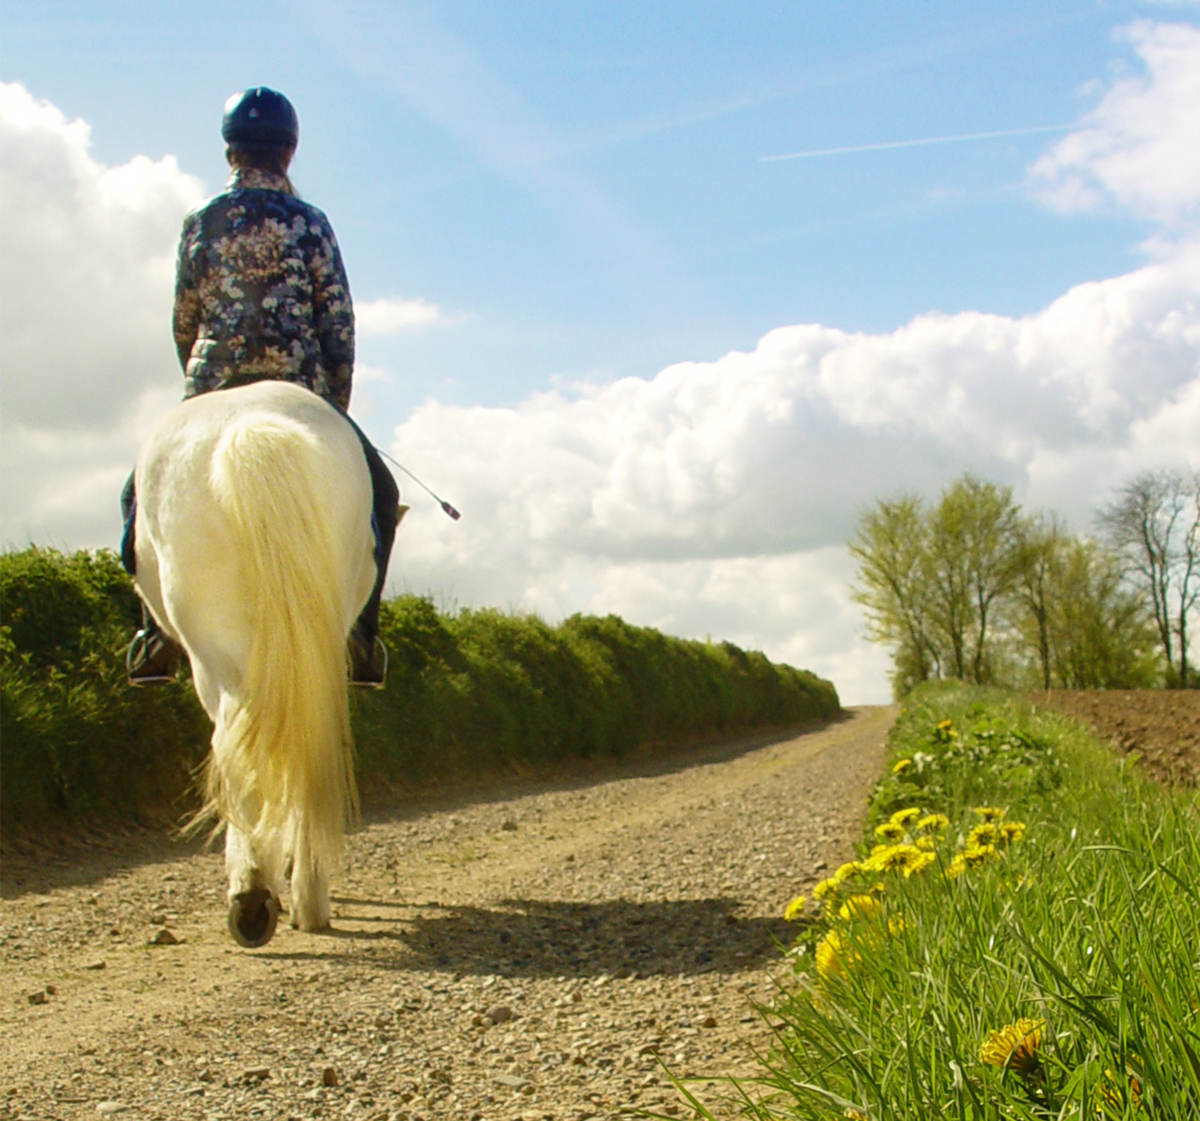 A horse and rider trotting along a country road next to a hedge and field on a sunny day